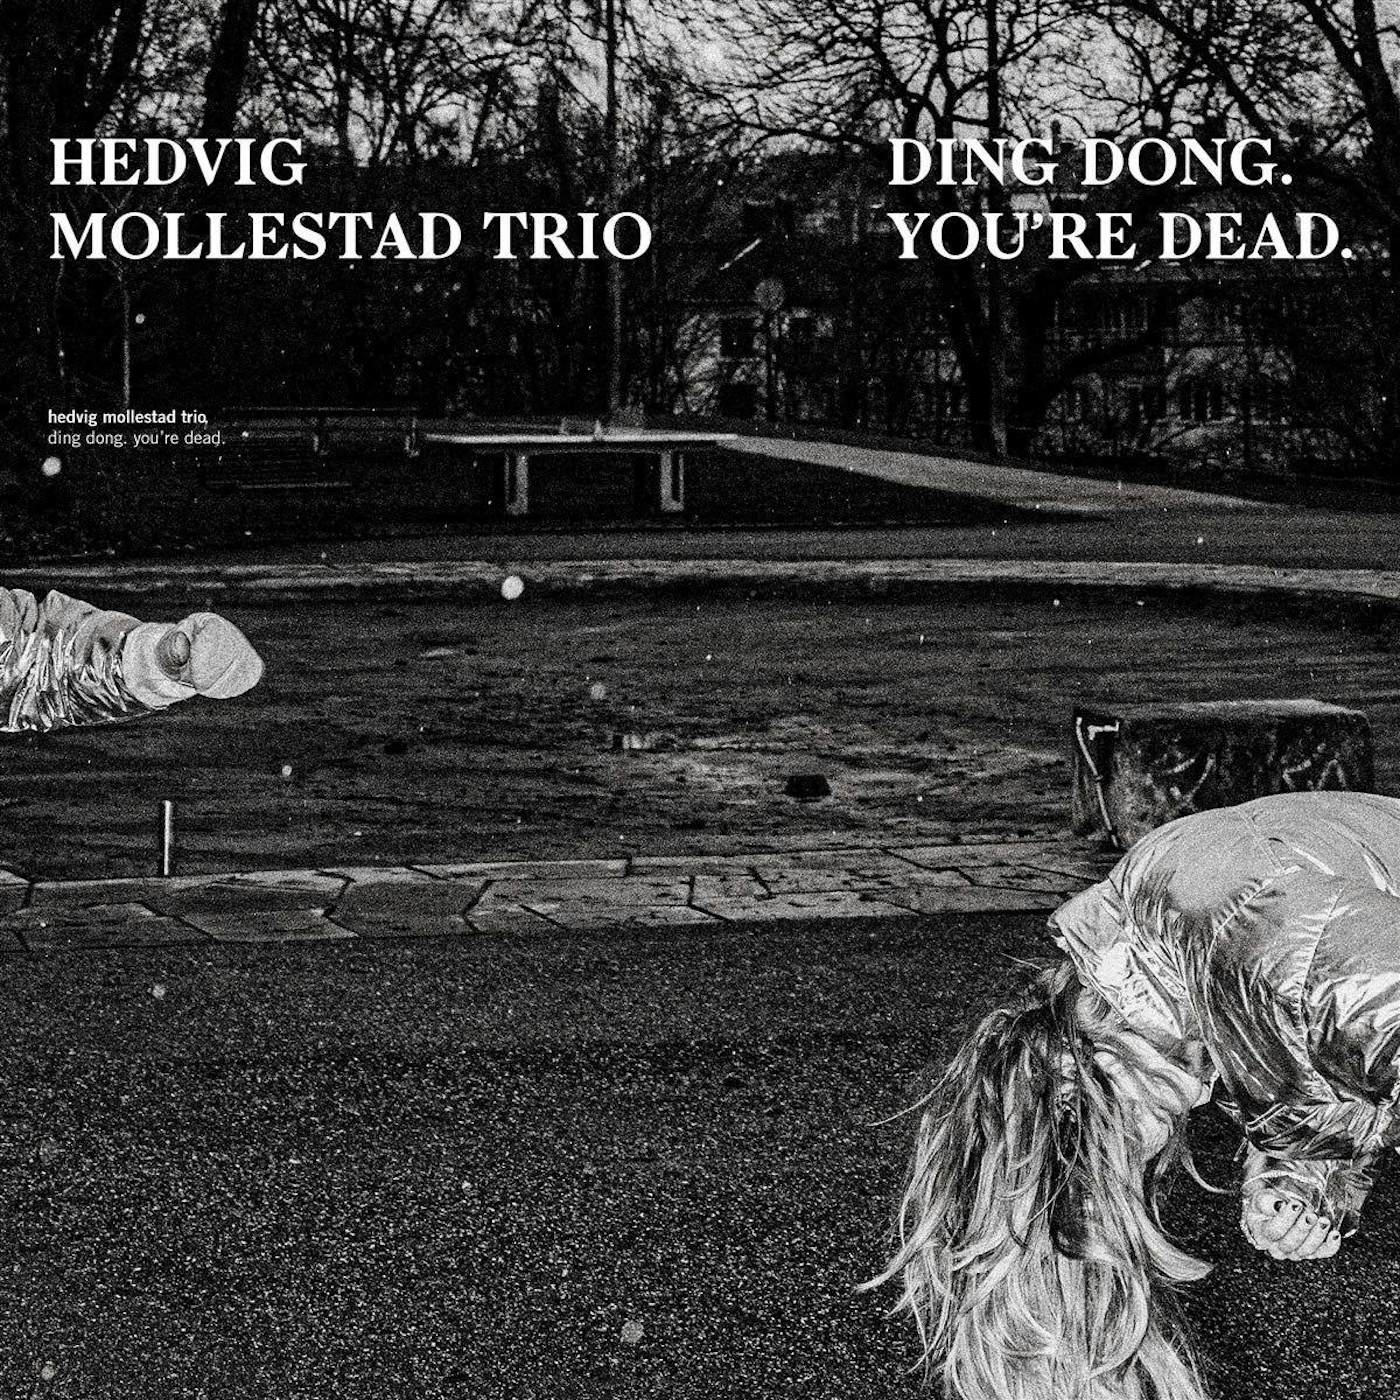 Hedvig Mollestad Trio DING DONG YOU'RE DEAD CD